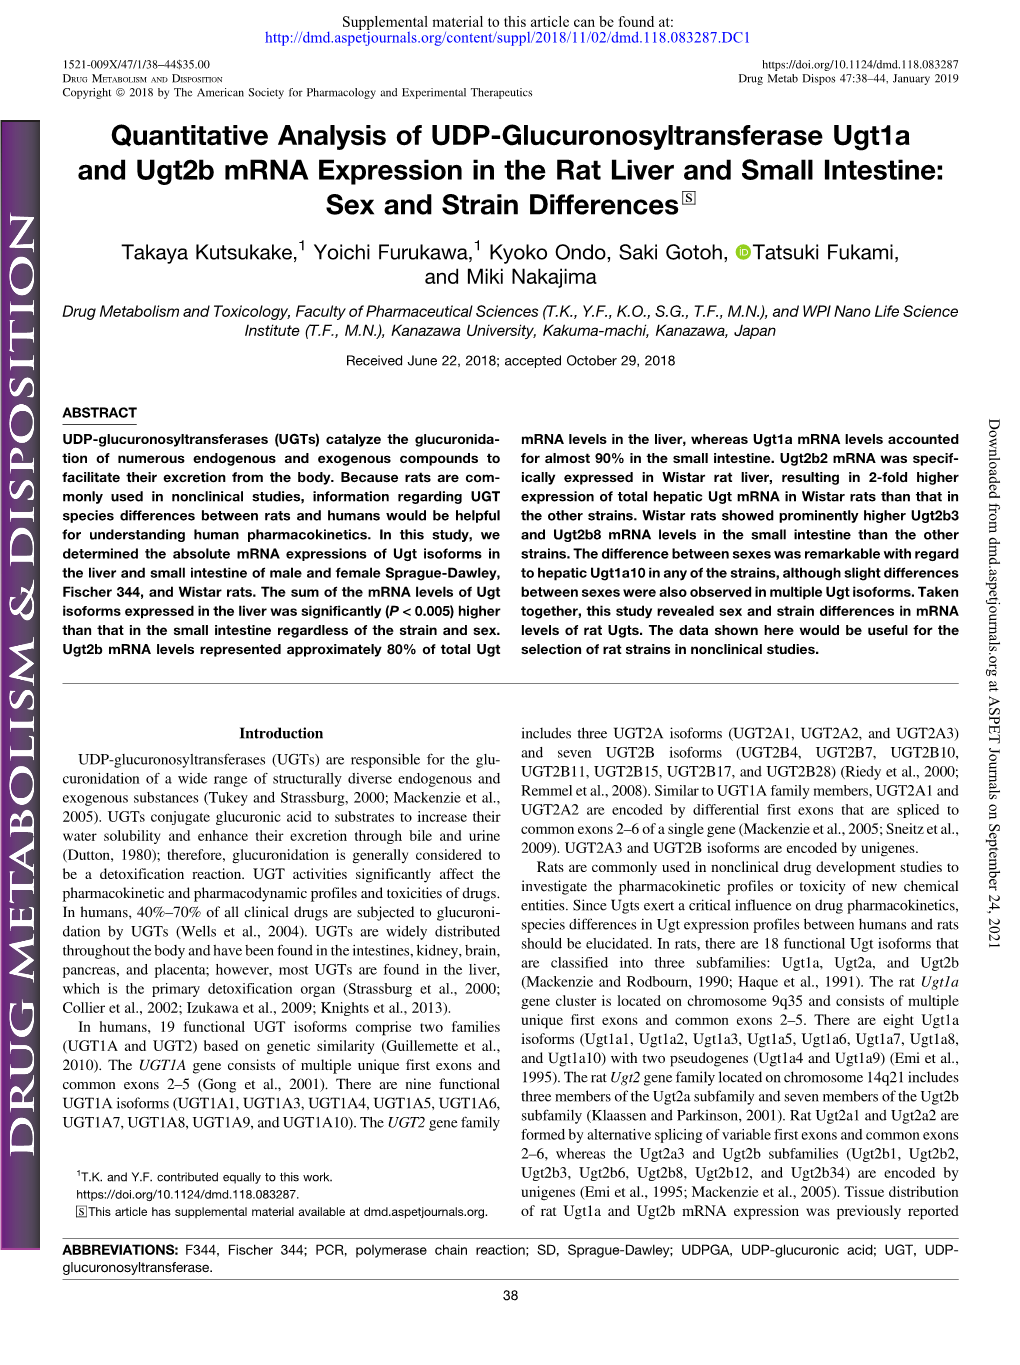 Quantitative Analysis of UDP-Glucuronosyltransferase Ugt1a and Ugt2b Mrna Expression in the Rat Liver and Small Intestine: Sex and Strain Differences S